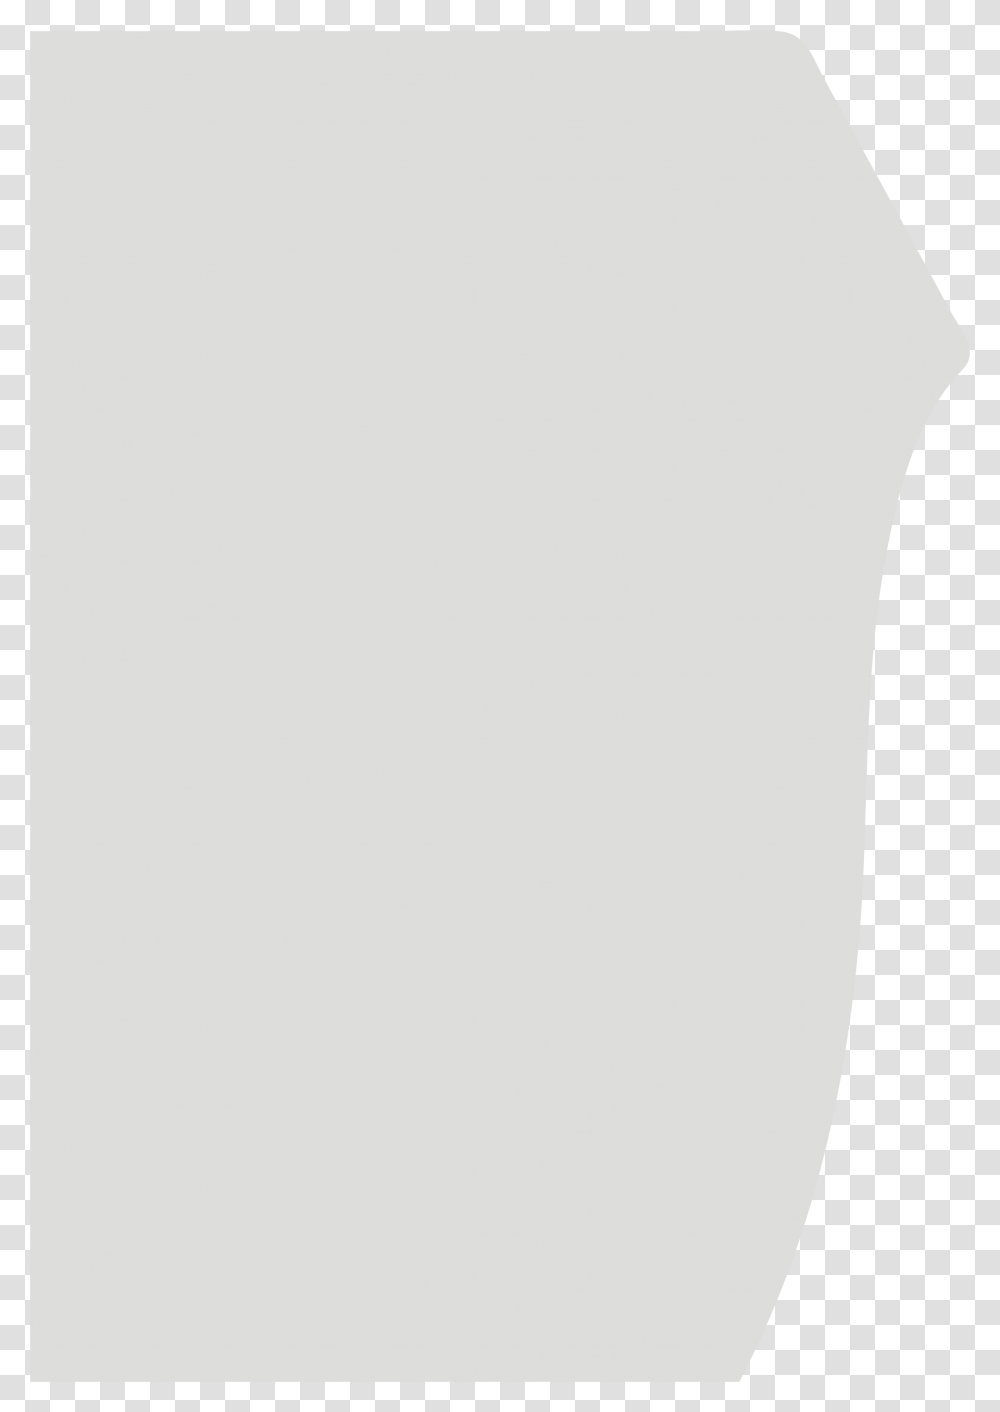 Background Images Format, Face, White, Texture Transparent Png